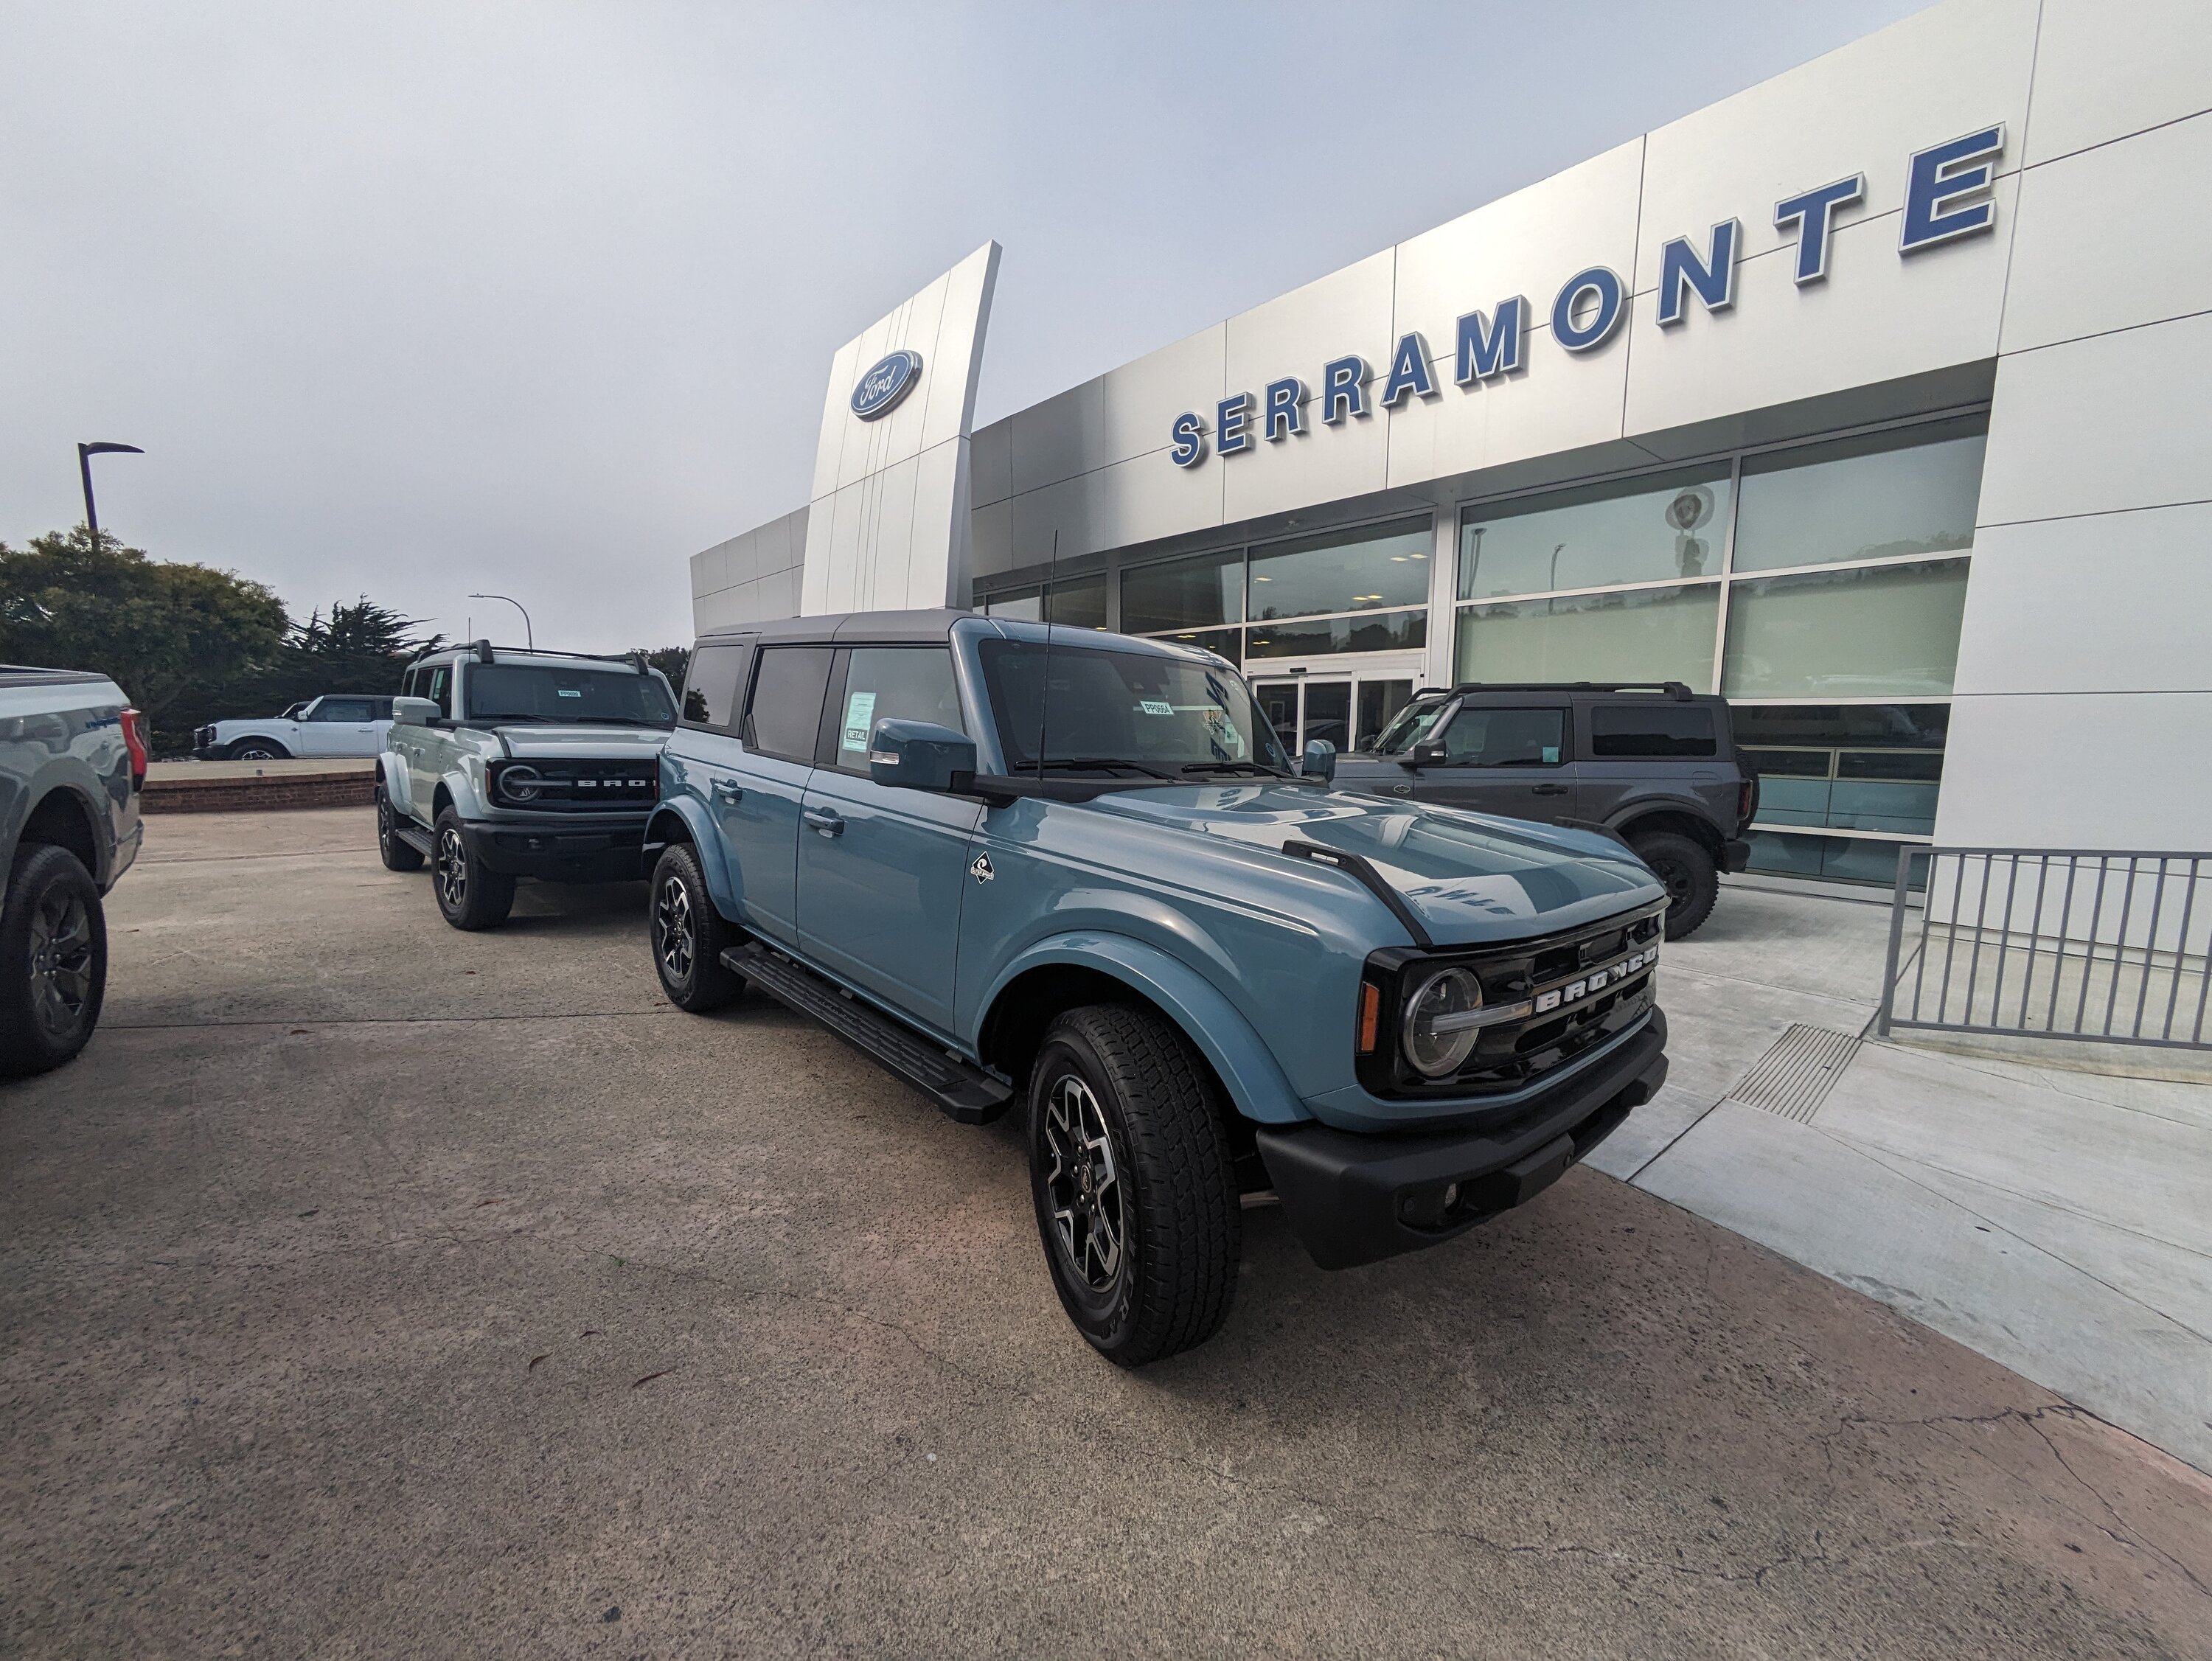 Ford Bronco 3 Four Door Broncos at MSRP (Two hard top, one dual top) Serramonte Ford PXL_20230805_235724195